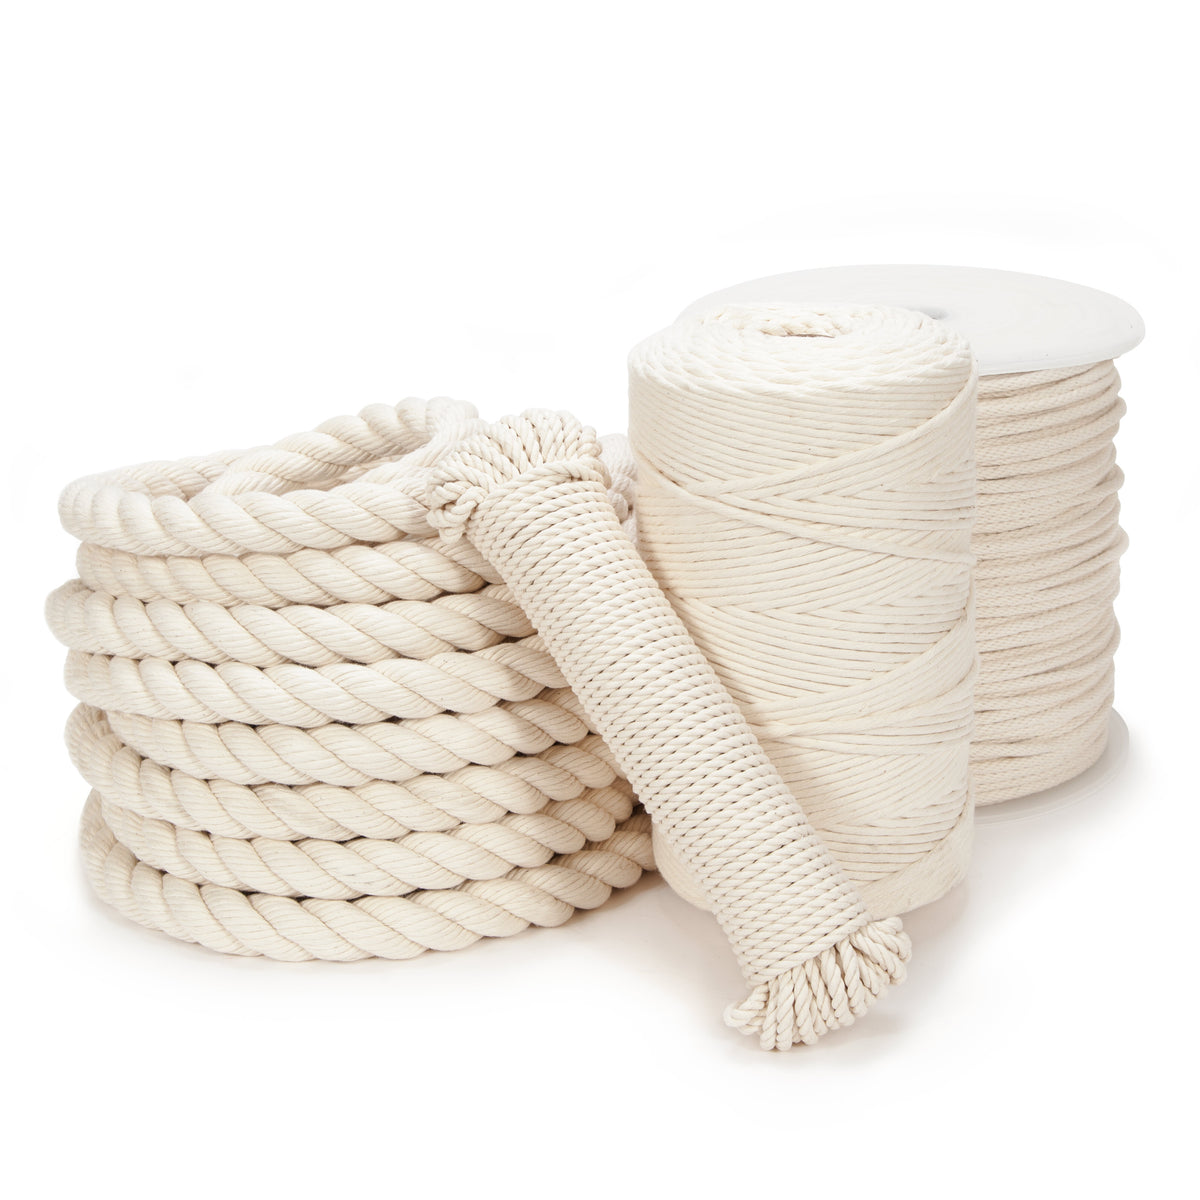 Cotton Rope — Knot Rope Supply, 51% OFF